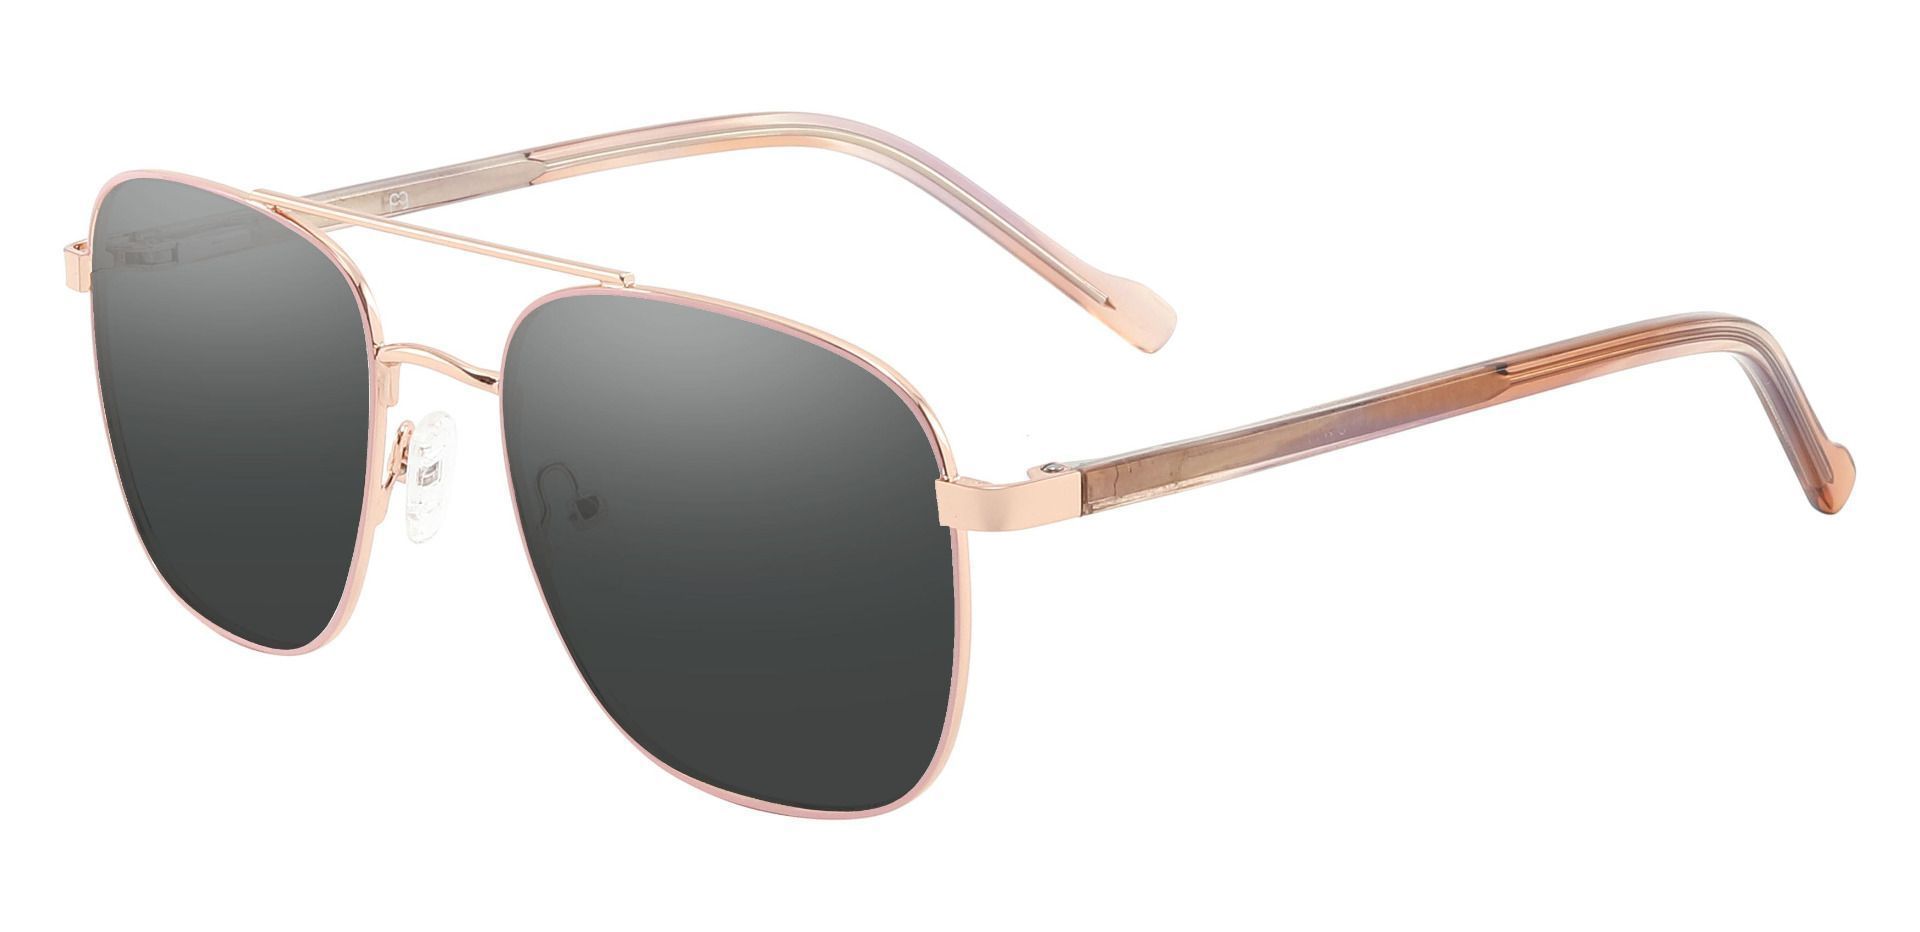 Howell Aviator Non-Rx Sunglasses - Pink Frame With Gray Lenses